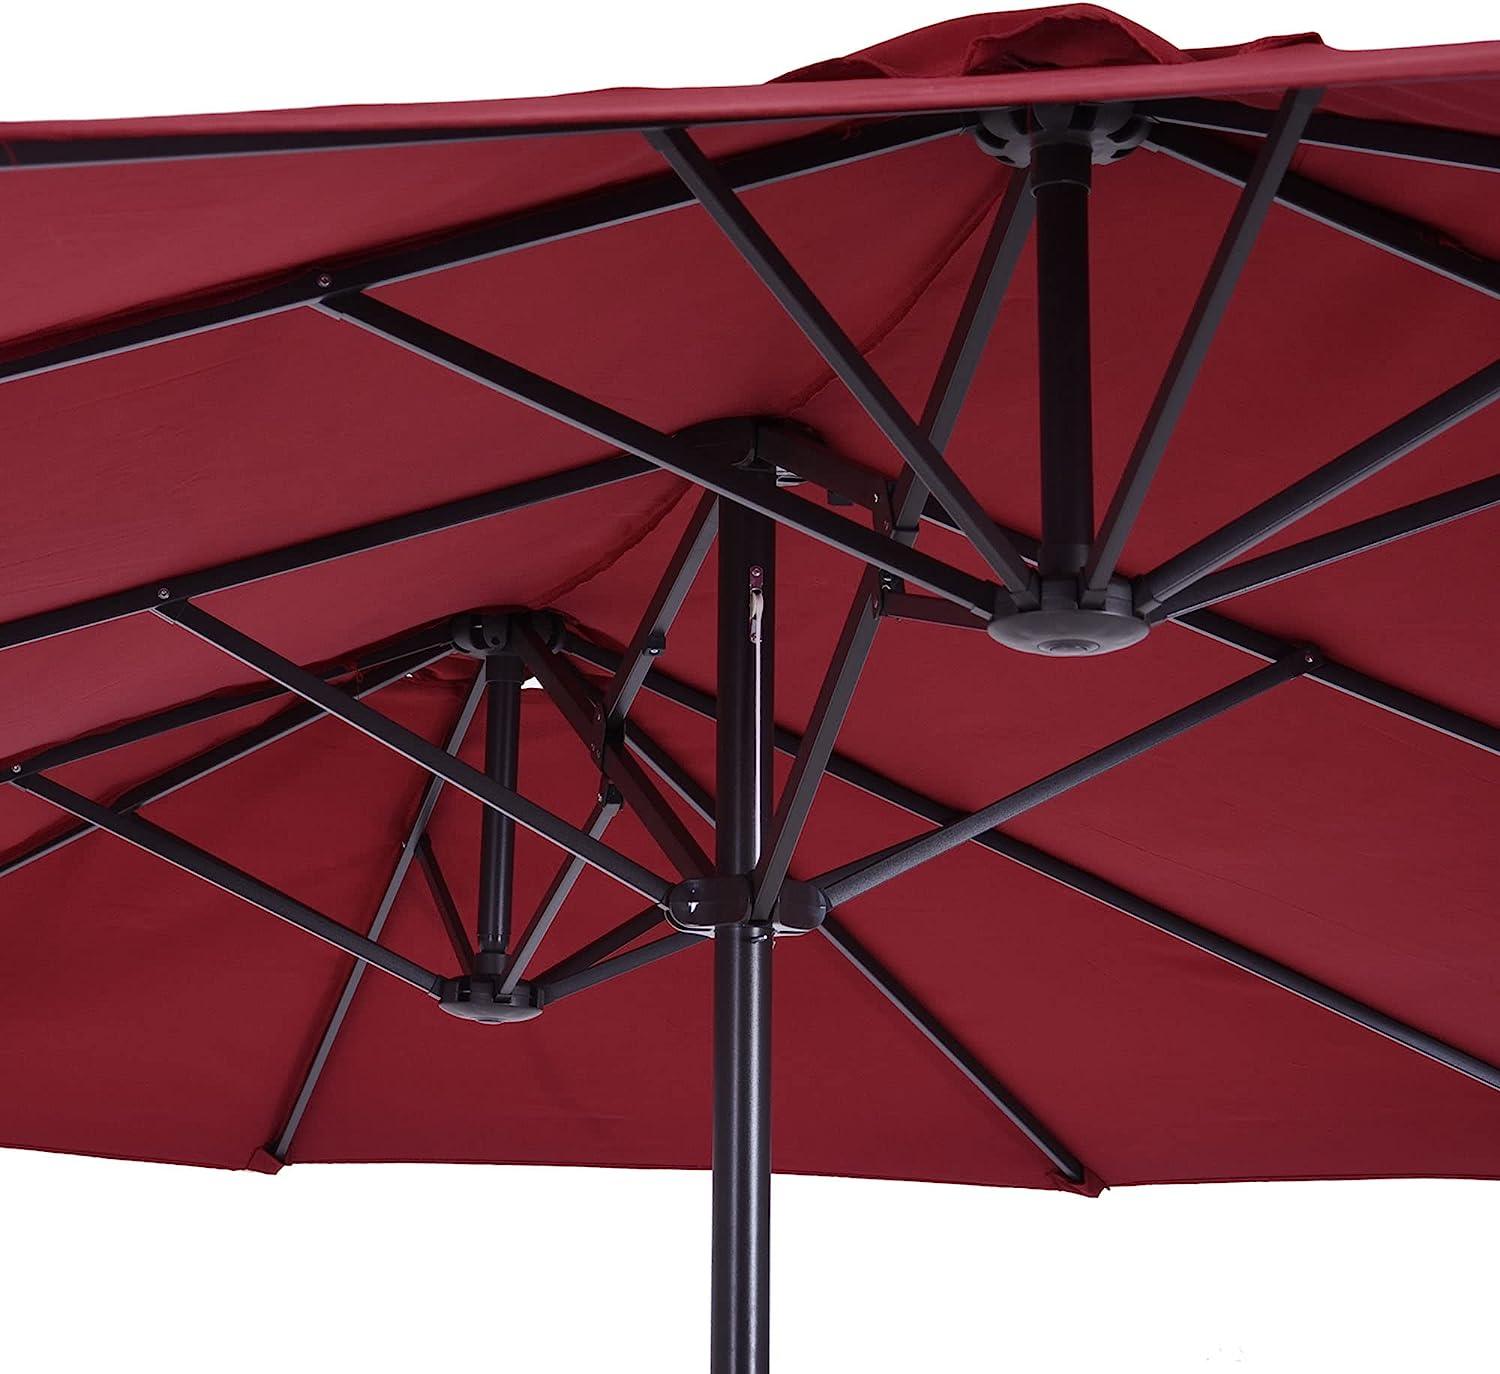 LazyRella™ 15ft Patio Umbrella Double-Sided Outdoor Market Extra Large Umbrella with Crank Handle for Deck, Lawn, Backyard and Pool - Lazy Pro